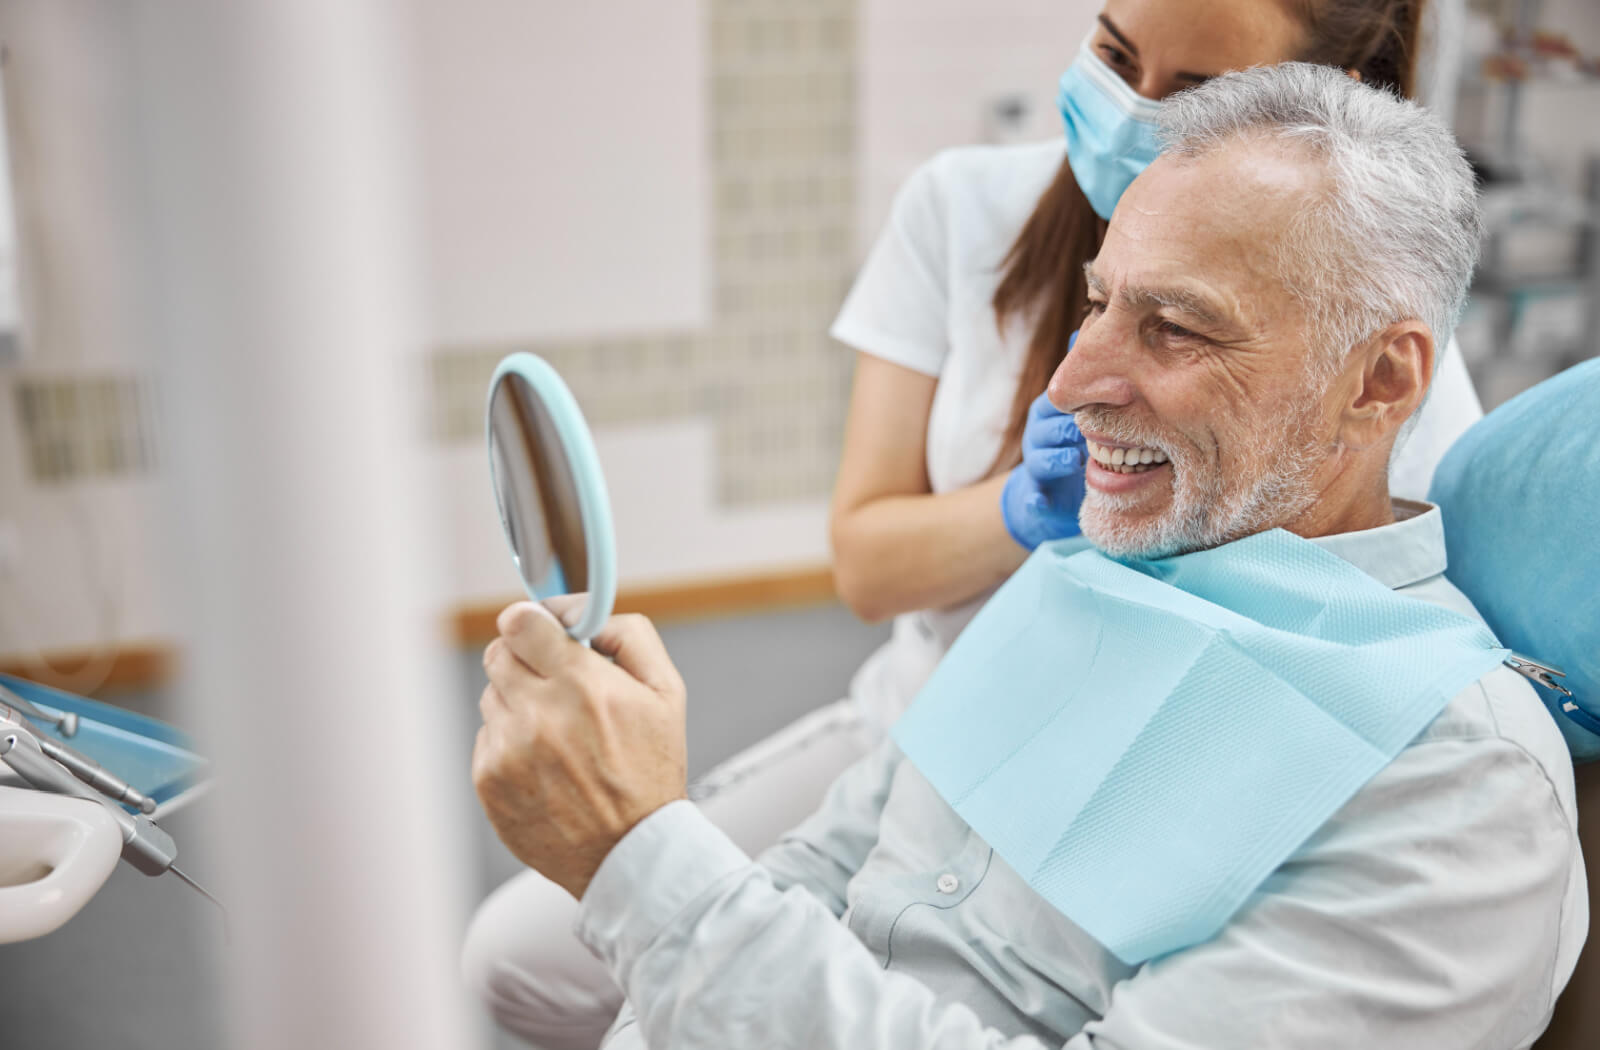 A senior man sitting in a dentist's chair, holding up a mirror and smiling with his dentist in the background